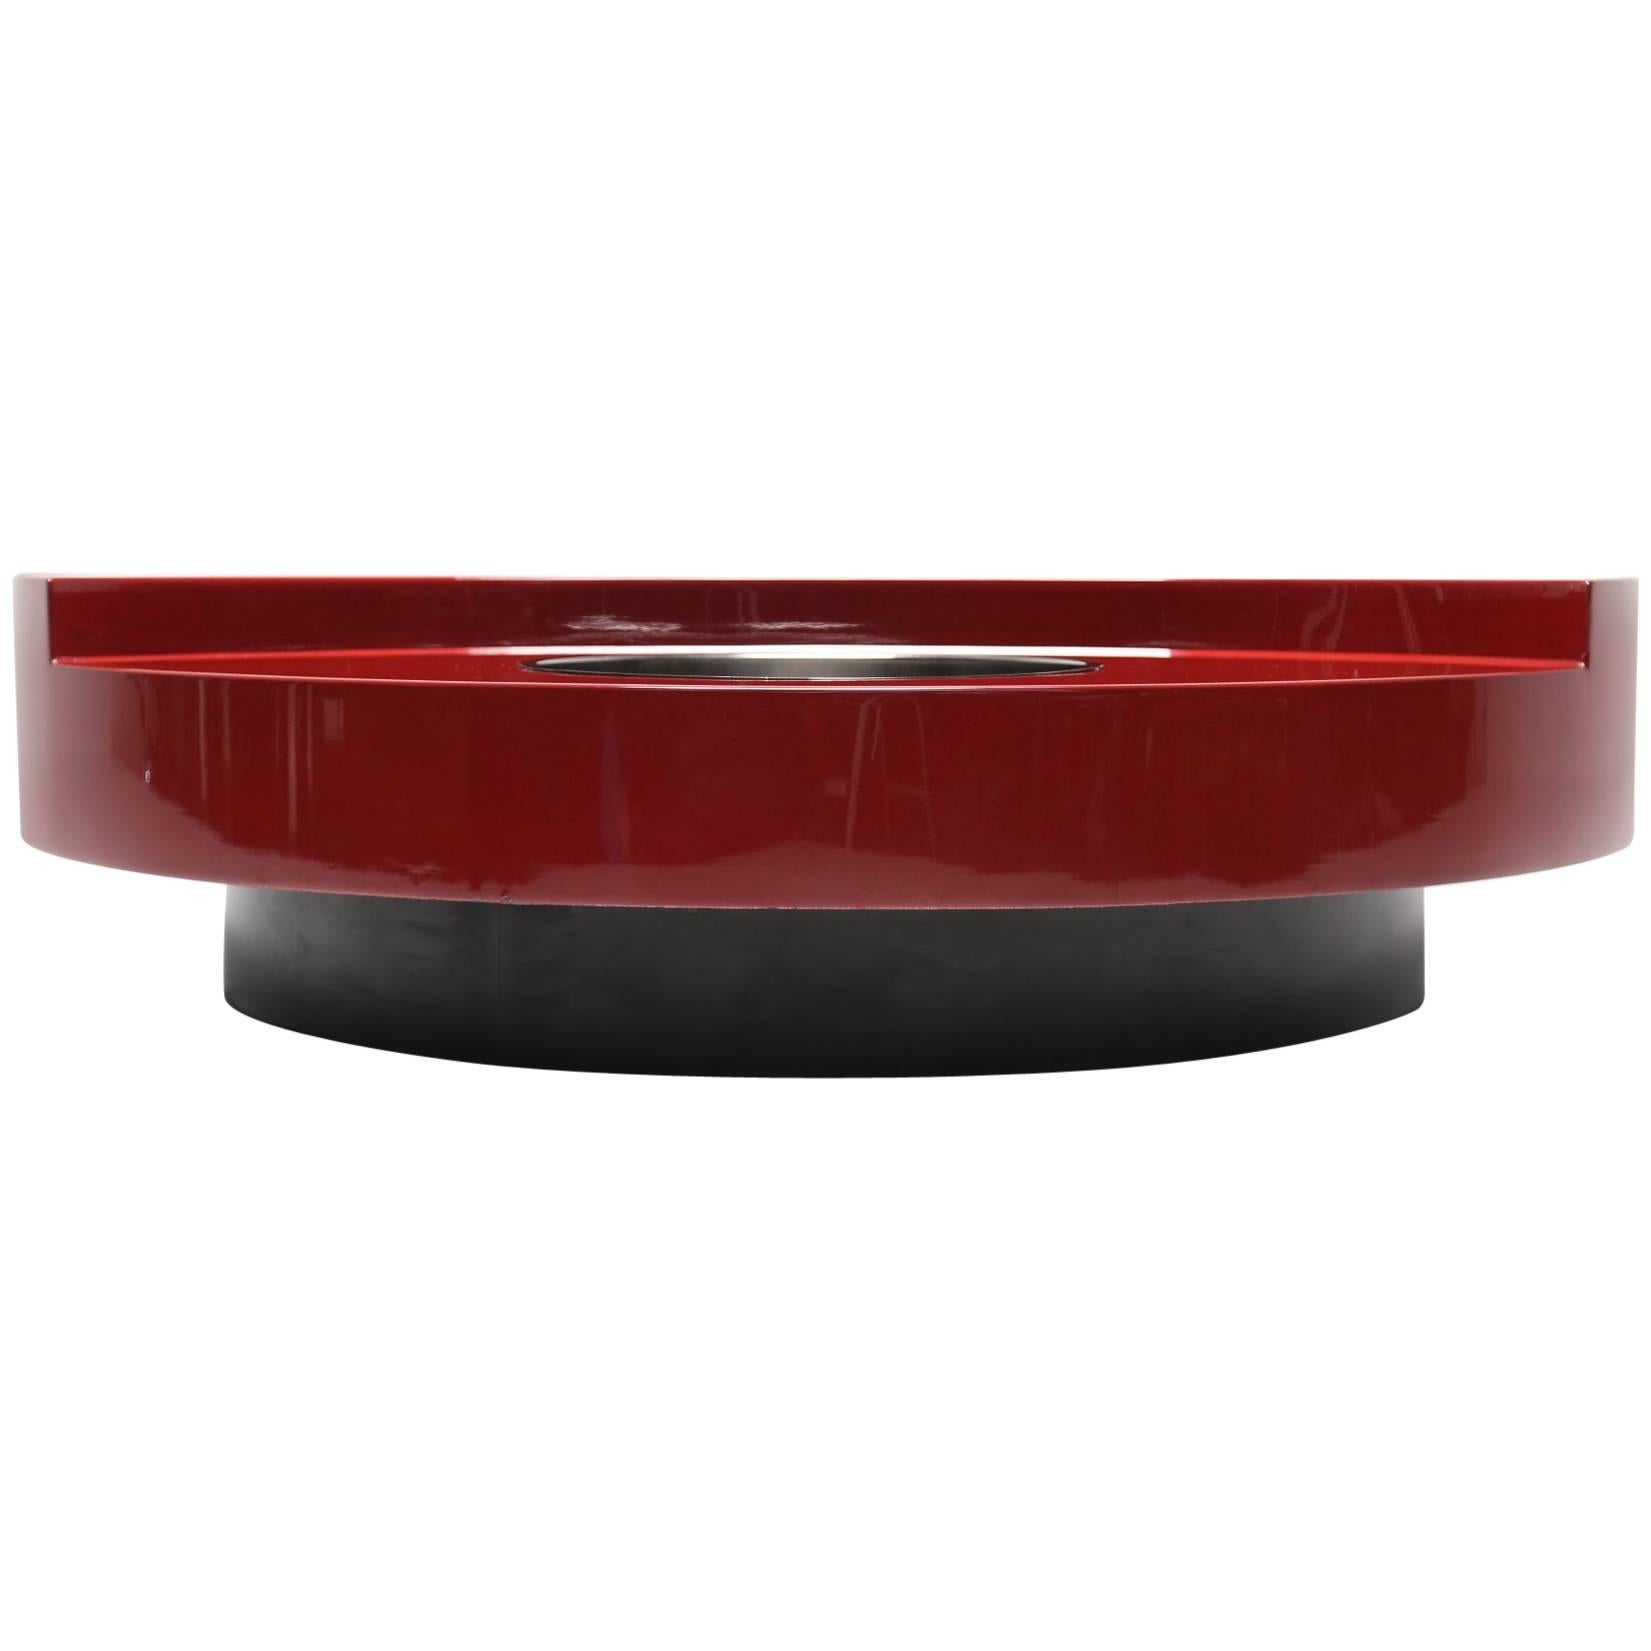 This super glam TRG revolving cocktail/coffee table is the epitome of rock n' roll. Designed by celebrity photographer Willy Rizzo in the 1970s this red oxblood lacquered table with subtle black flecks revolves on a black plinth. A chrome drinks